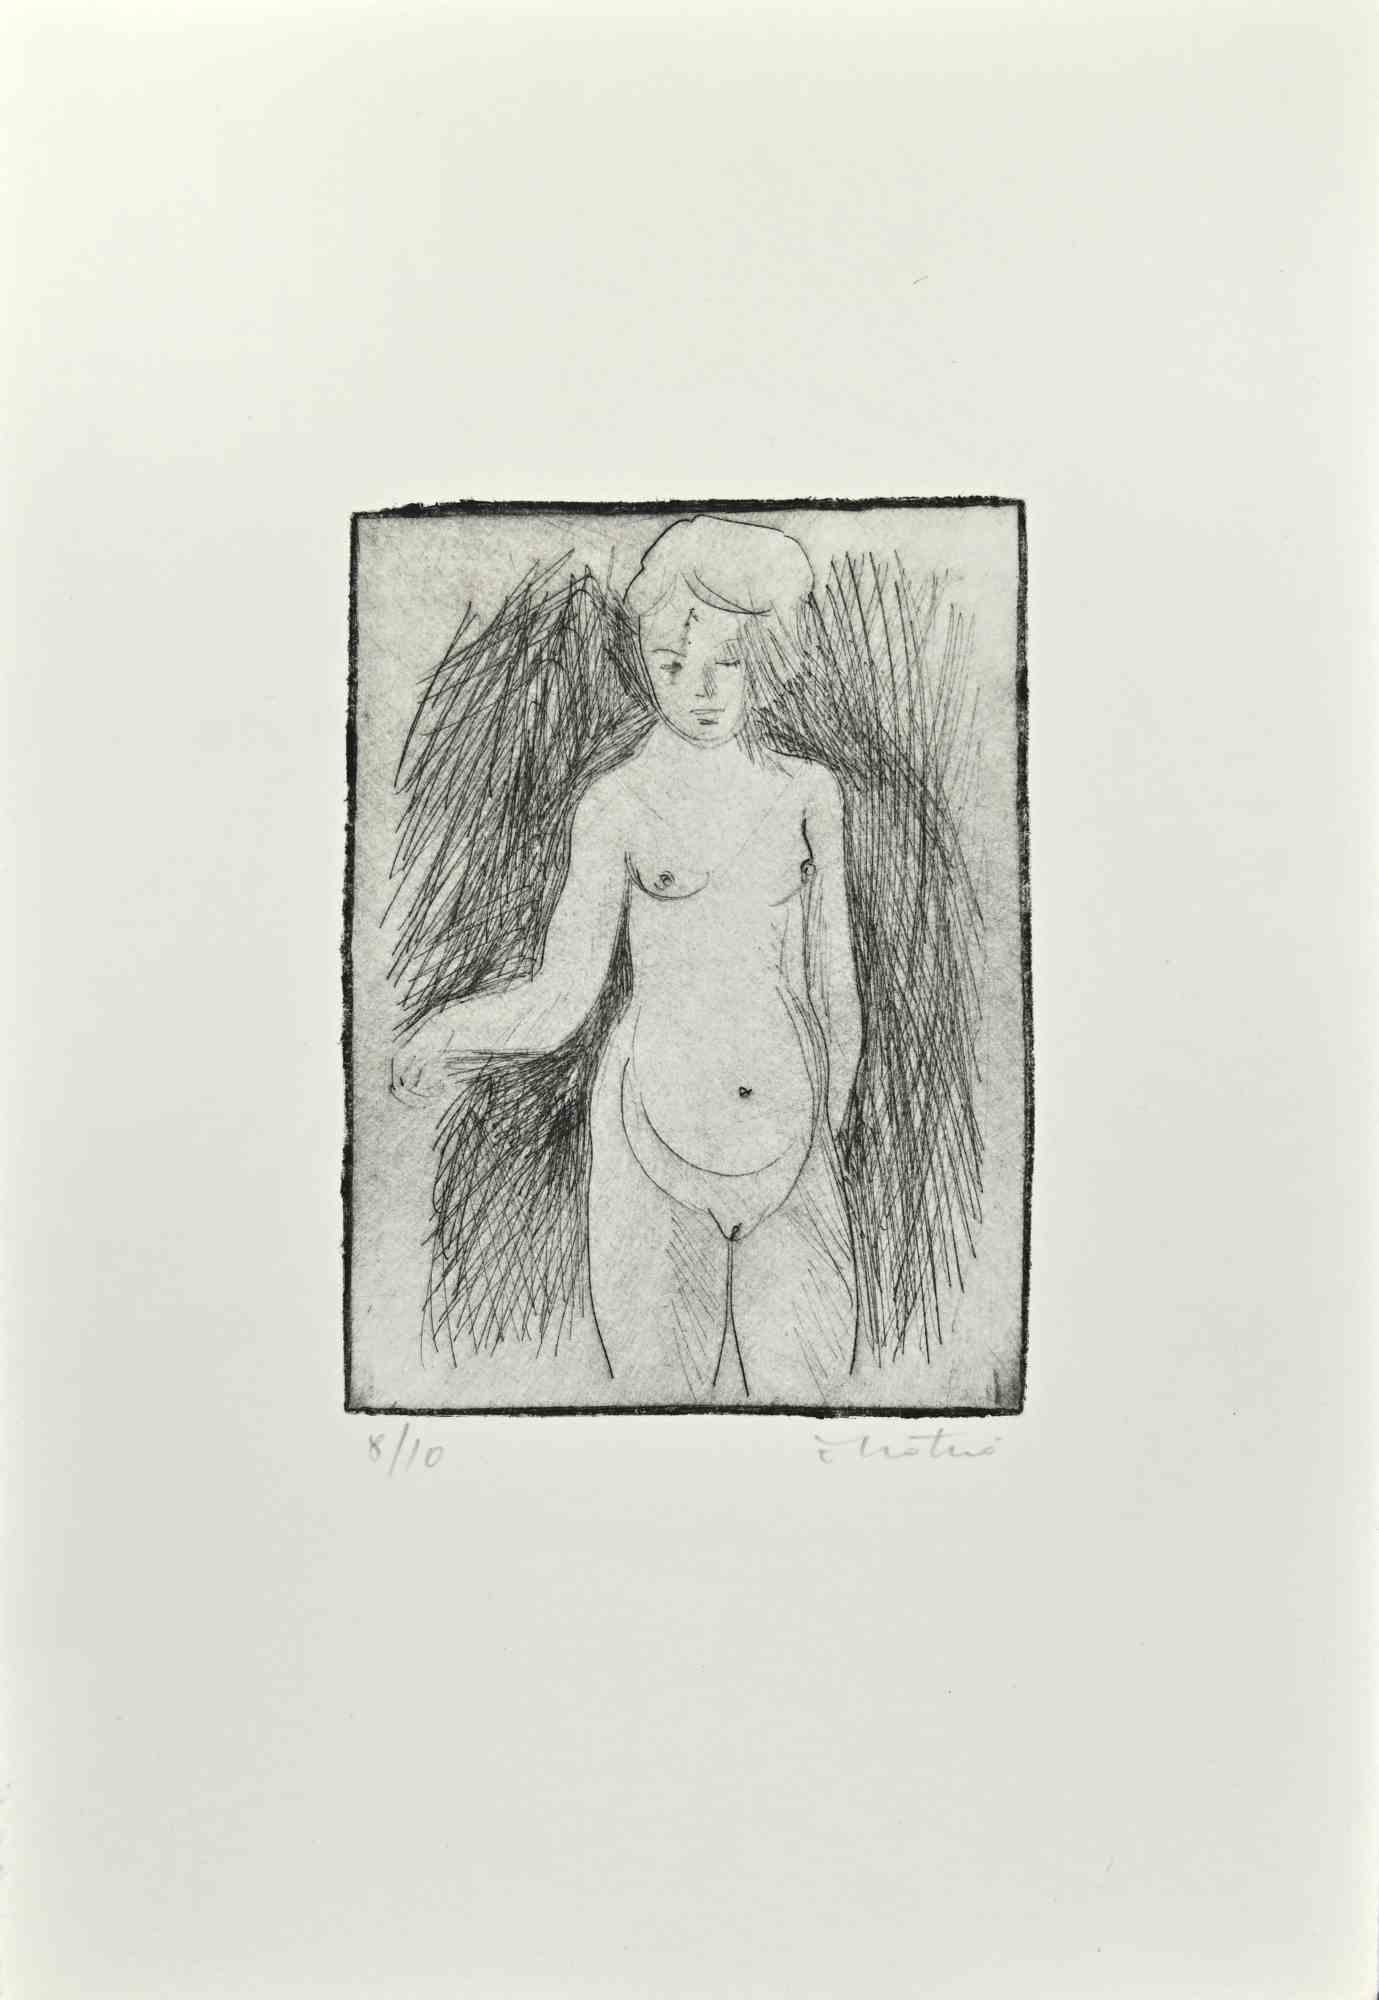 Nude is an Etching realized by Enotrio Pugliese in 1963.

Limited edition of 10 copies numbered and signed by the artist.

Good condition on a white cardboard.

Enotrio Pugliese (May 11, 1920 - August 1989) was an Italian painter. Born in Buenos